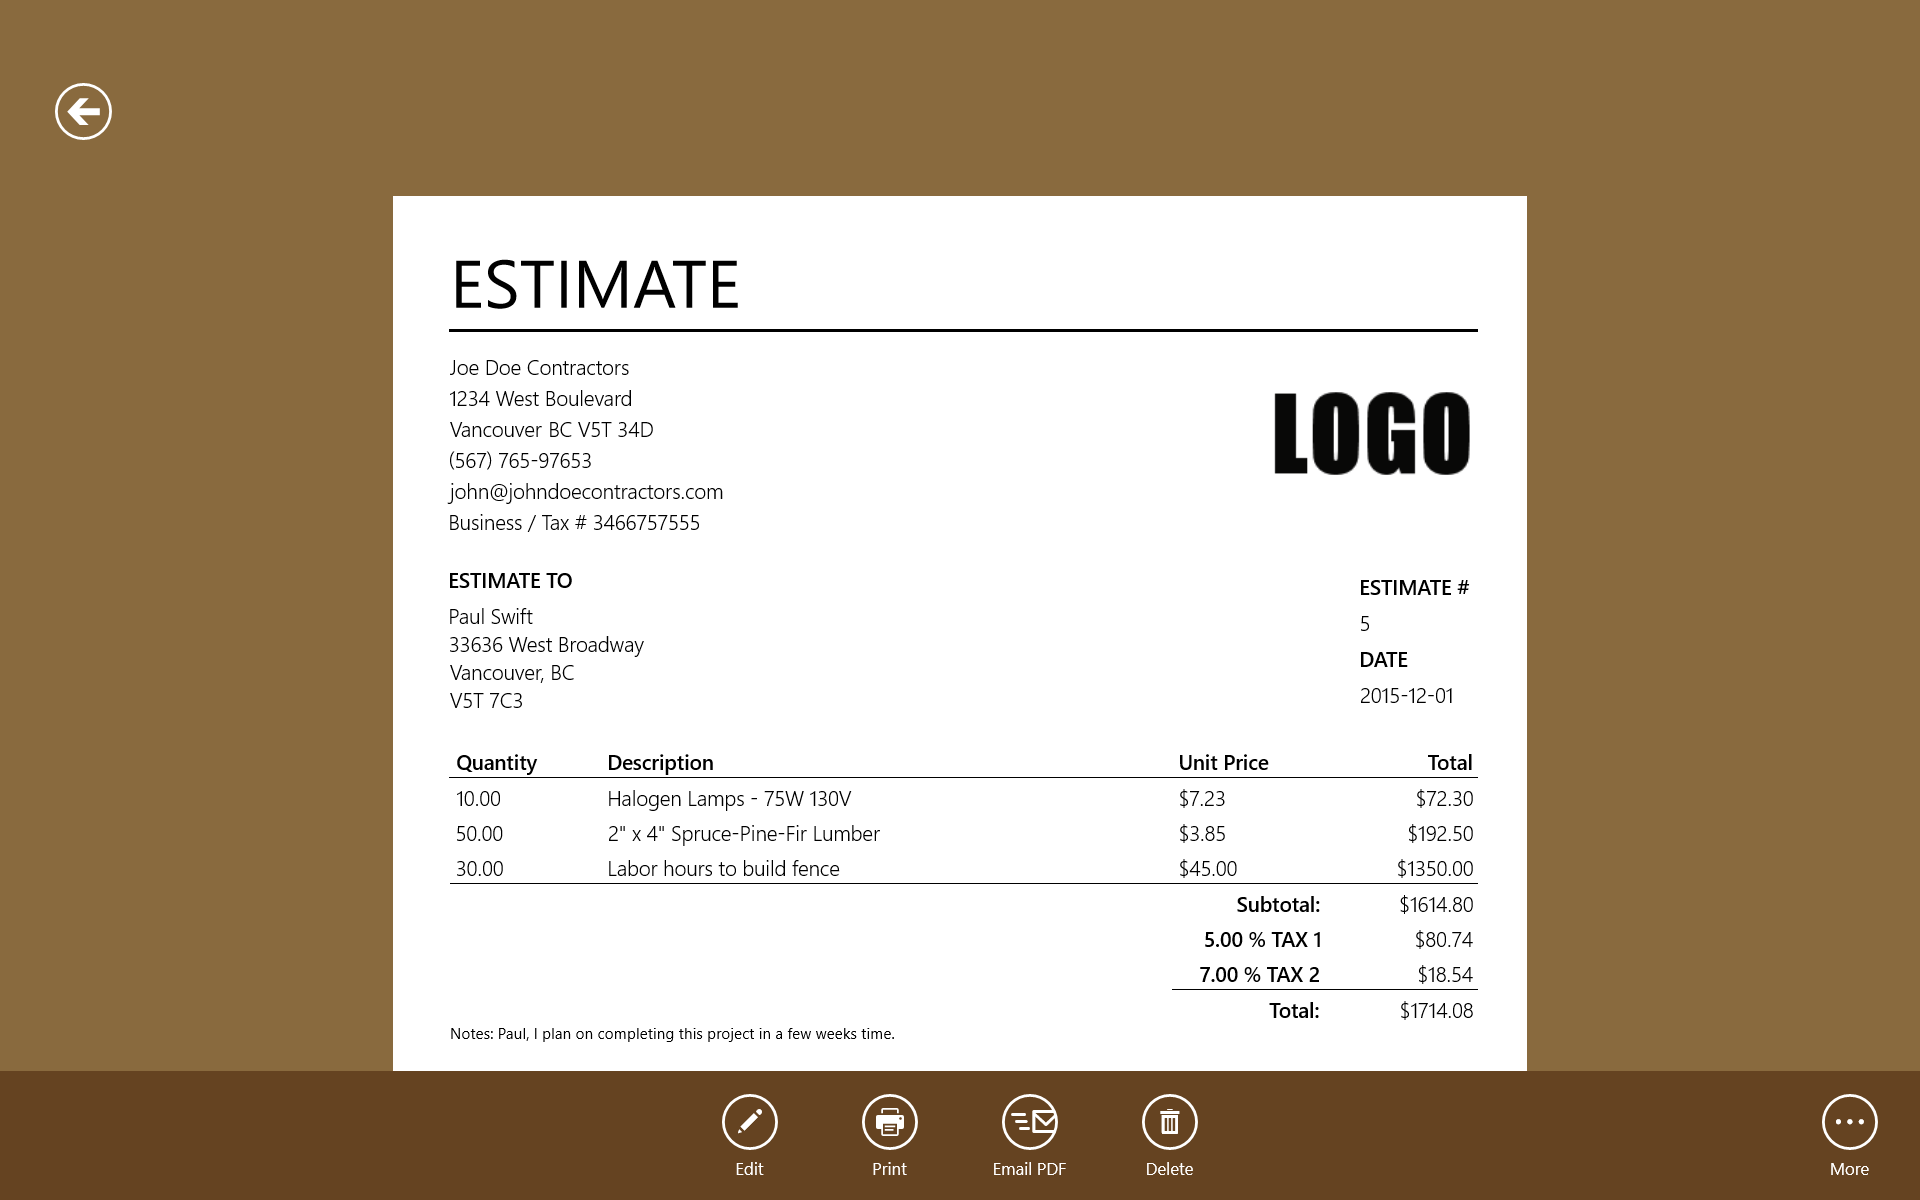 Create a professional looking estimate in a few minutes time and email it to your client.